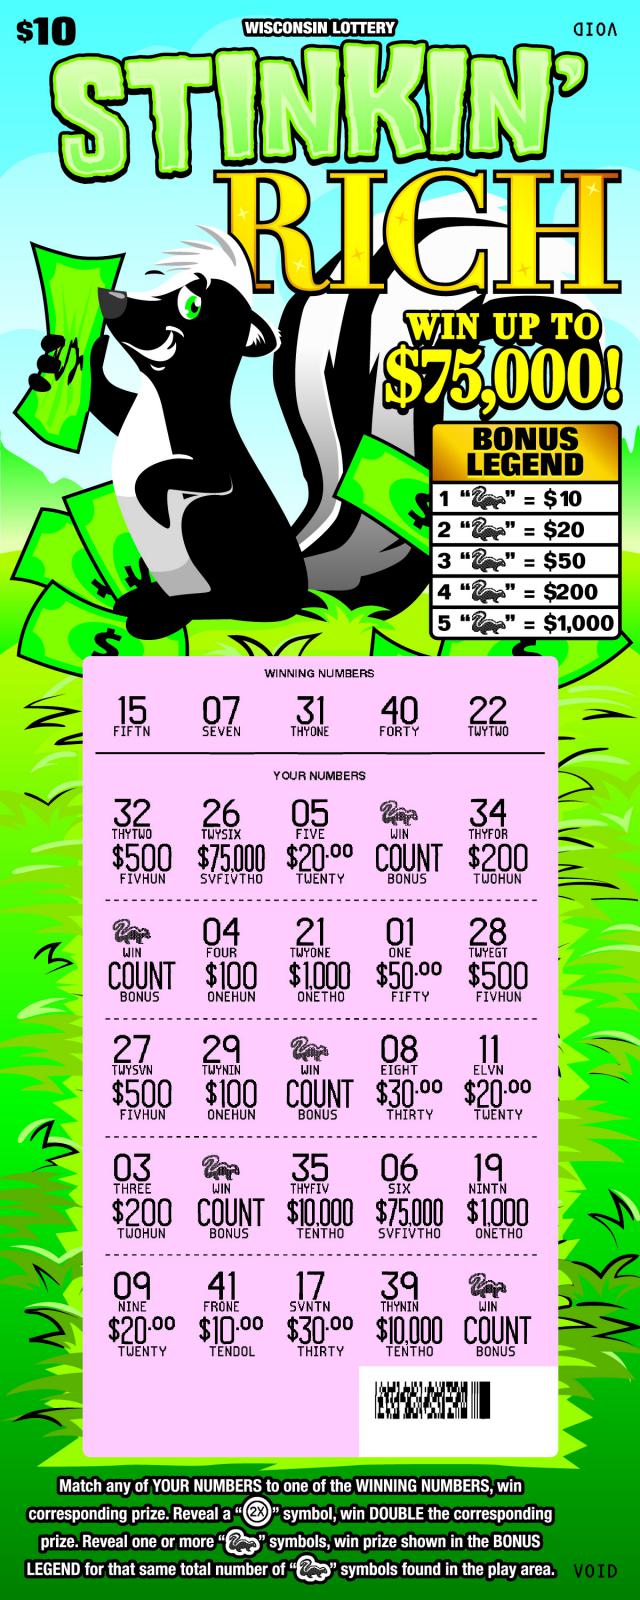 Stinkin' Rich instant scratch ticket from Wisconsin Lottery - scratched